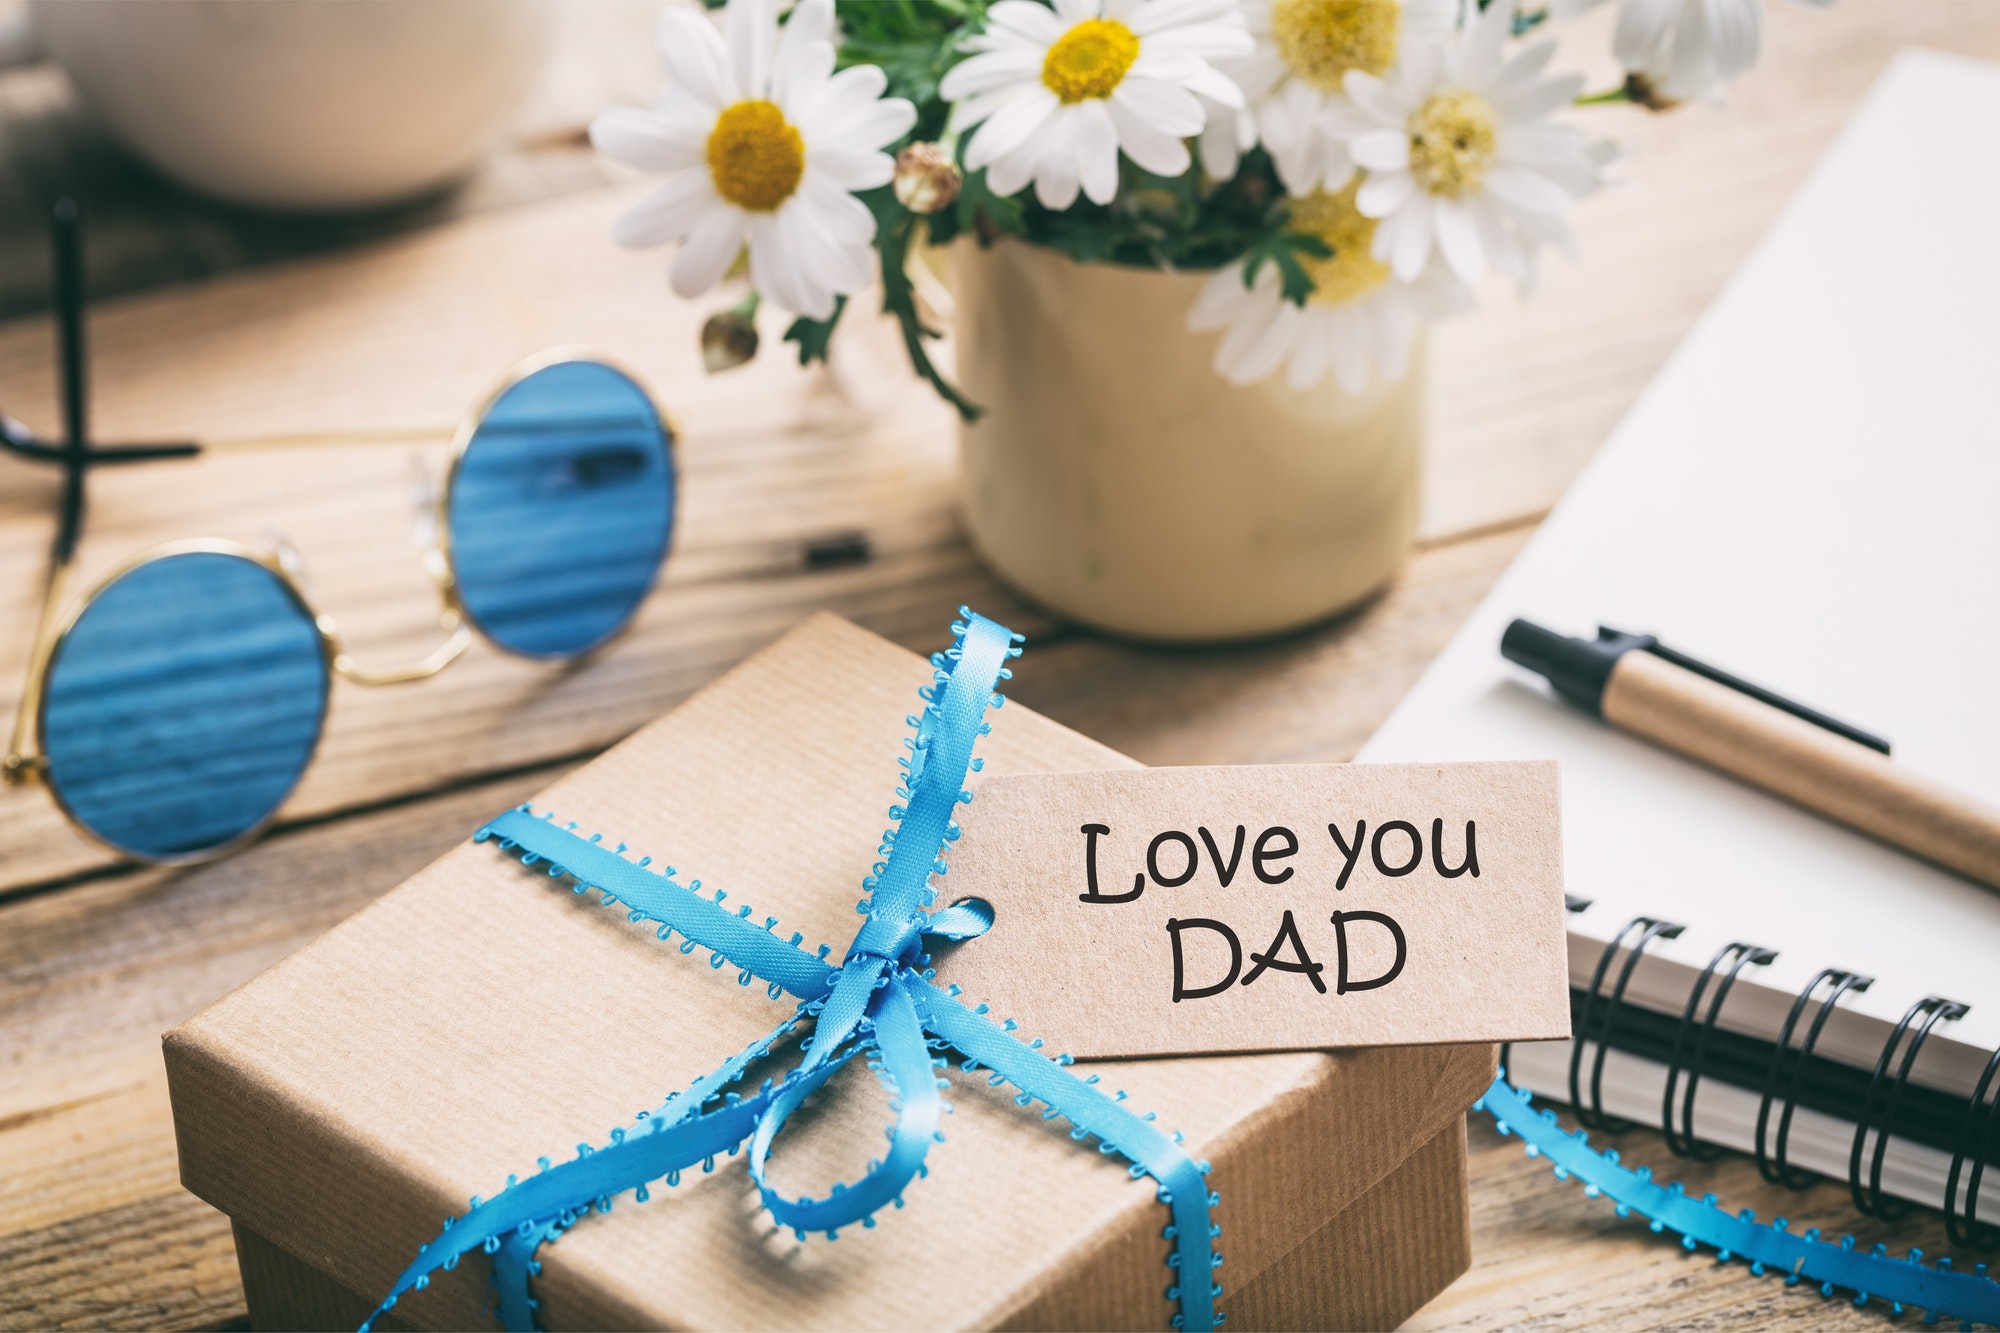 3 Healthy Tips For Dad This Father’s Day